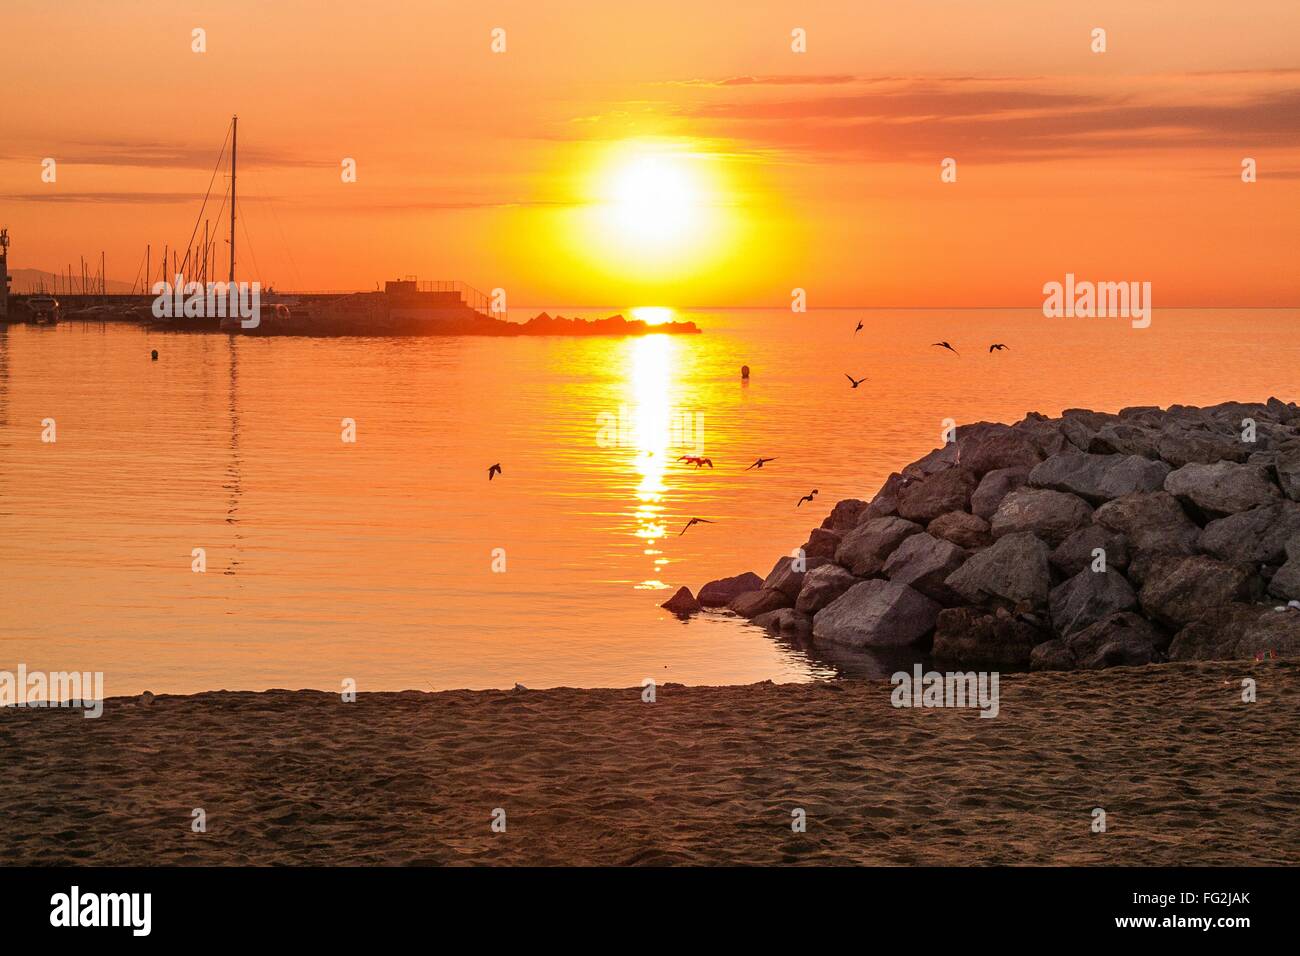 View Of Seascape At Sunset Stock Photo